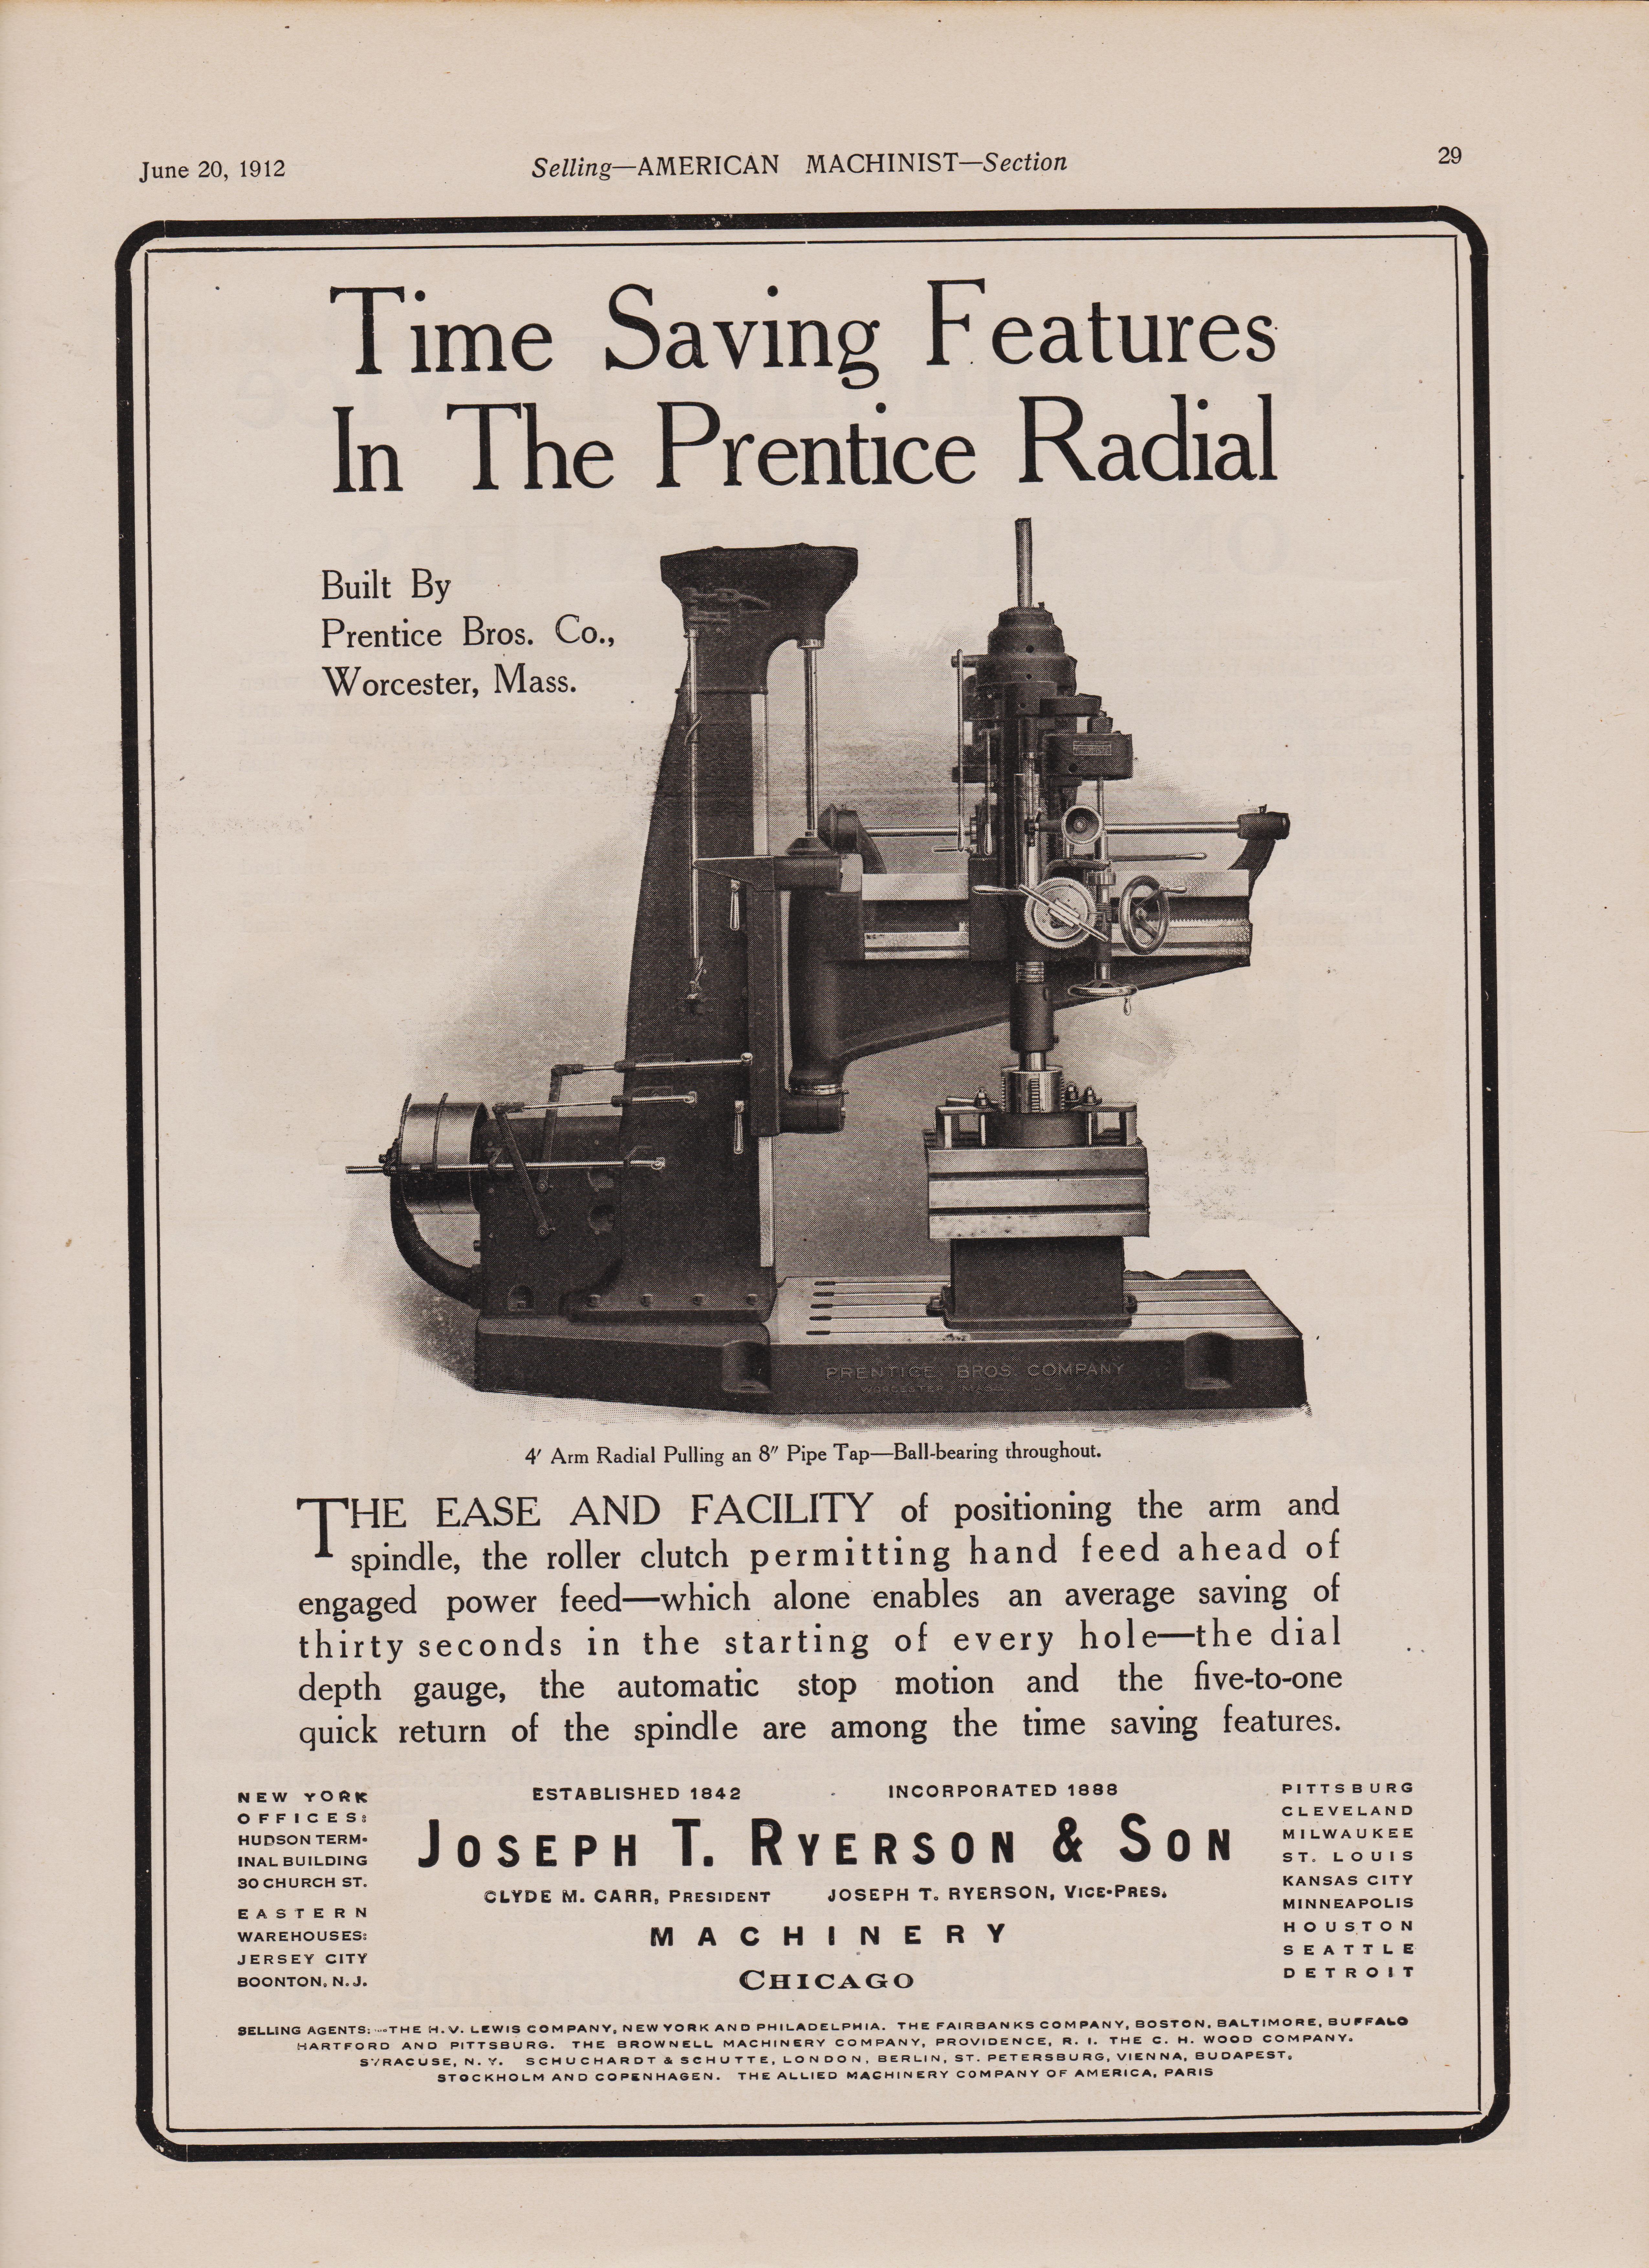 https://antiquemachinery.com/images-2021/1912-American-Machinist-Magazine-1912-June-30-pg-29Josept-t-ryerson-and-son-Radial-Drill-Press-machinery.jpeg